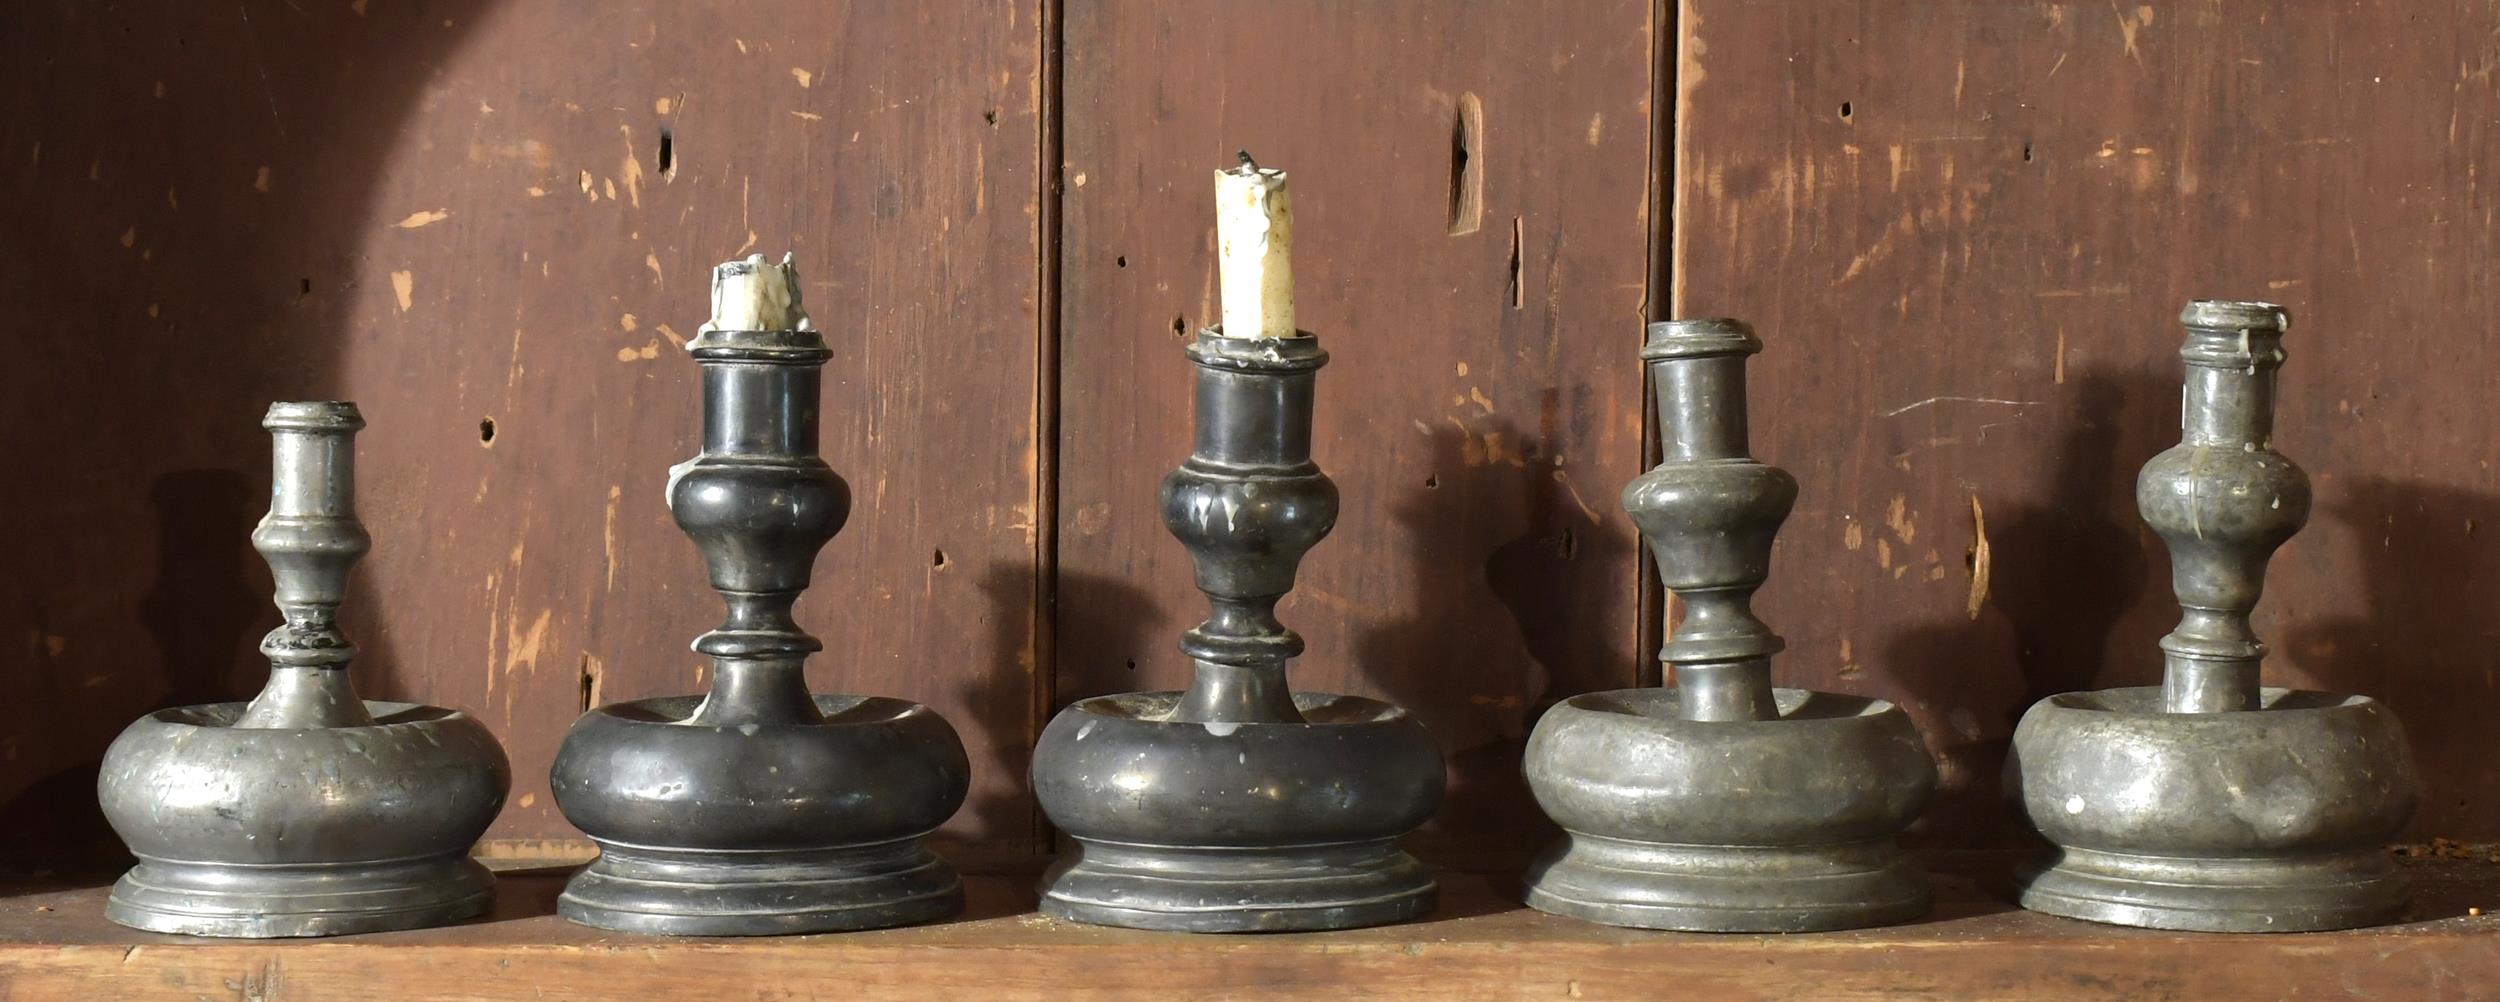 FIVE 17TH C. PEWTER CANDLESTICKS. Early